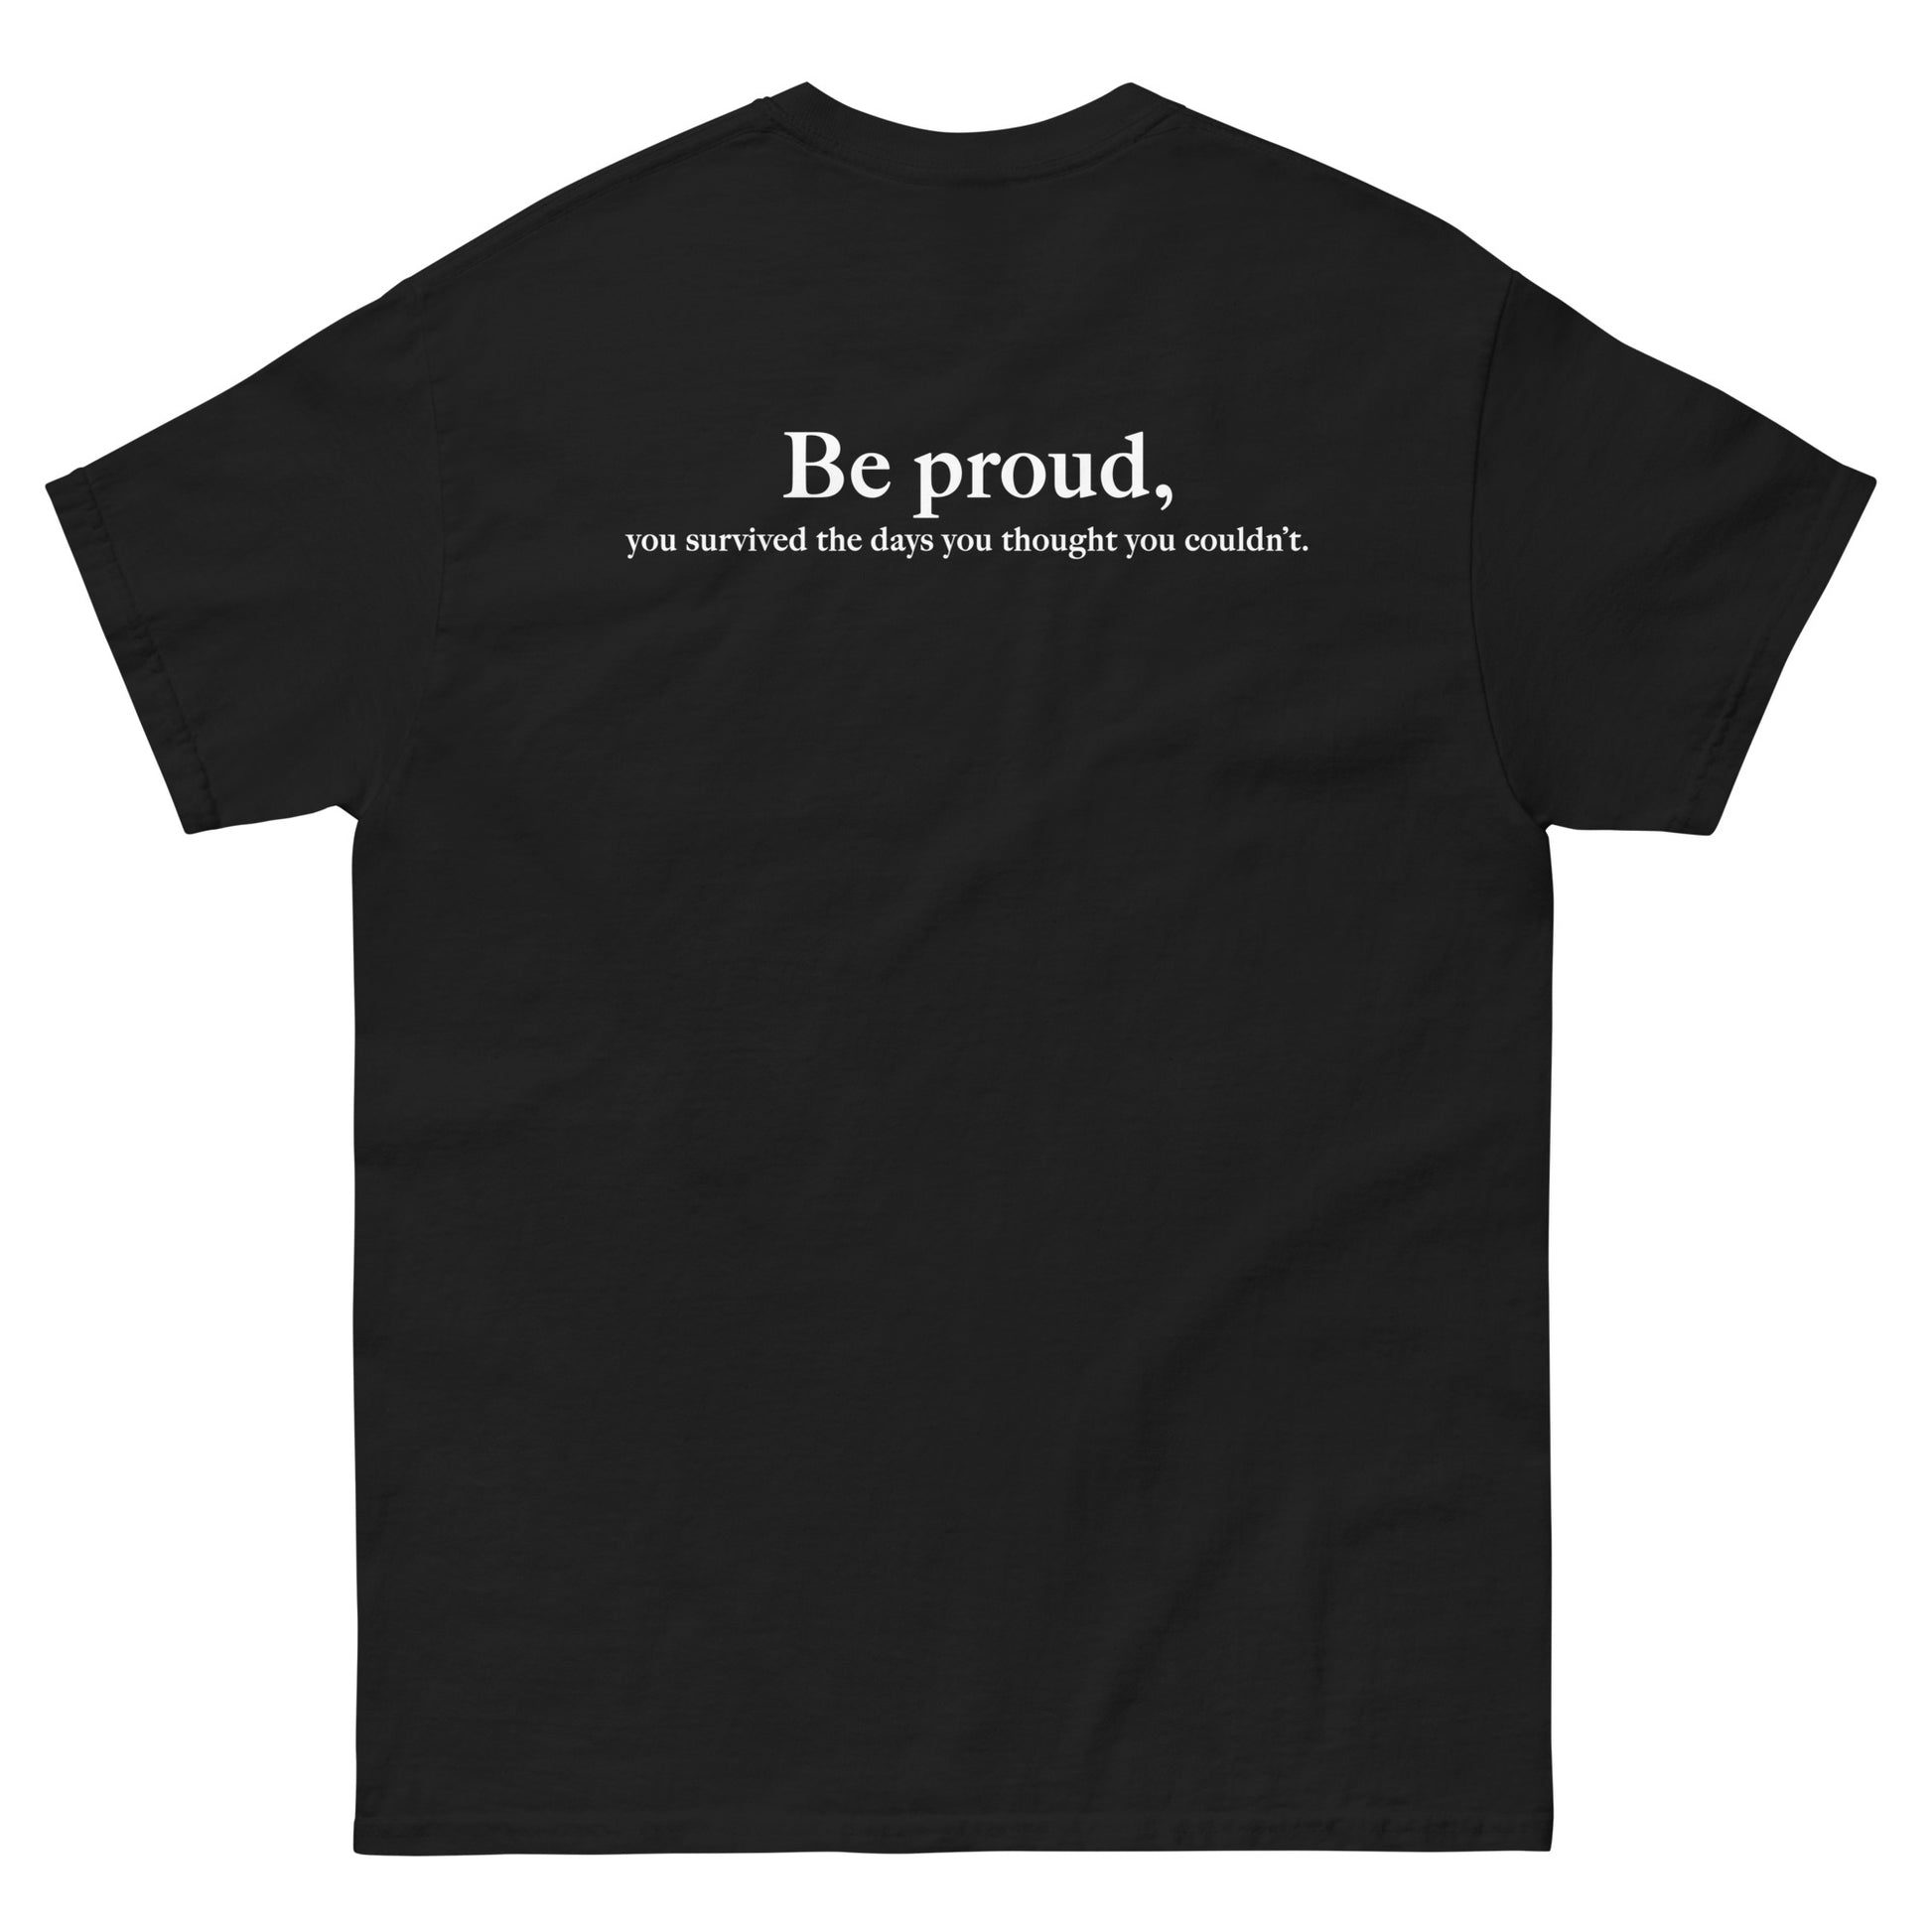 Black High Quality Tee - Front Design with "Be proud, " print on left chest - Back Design with a Phrase "Be proud, you survived the days you thought you couldn't." print